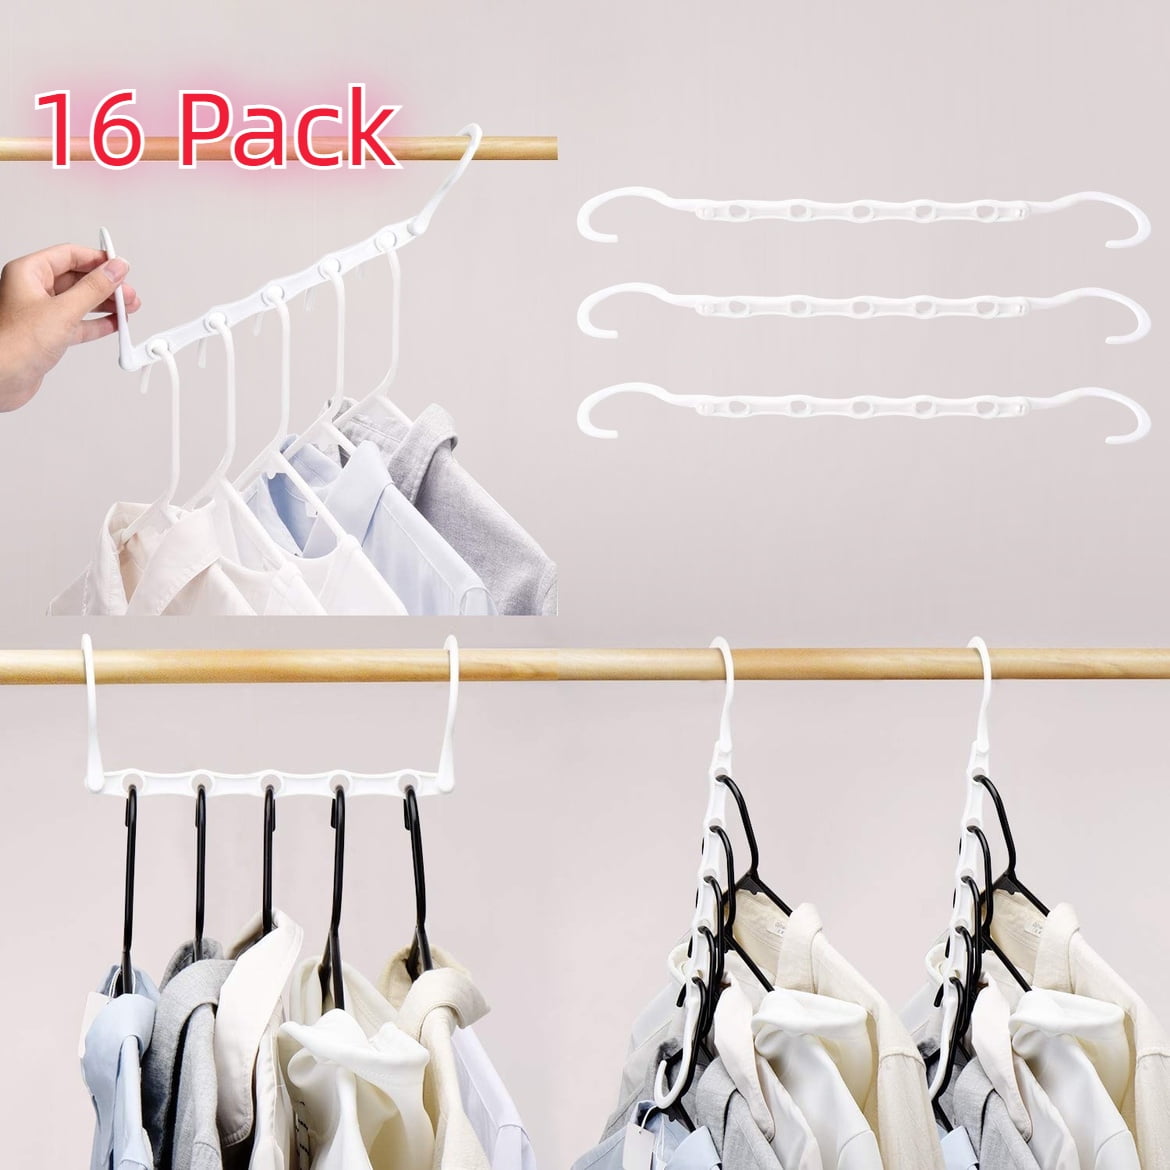  BHcorner Black Space Saving Hangers for Clothes,10 Pack Magic Hangers  Closet Space Saving,Sturdy Plastic Space Saver Hangers for Clothes, Updated  Multifunctional Closet Organizer Collapsible Hangers. : Home & Kitchen